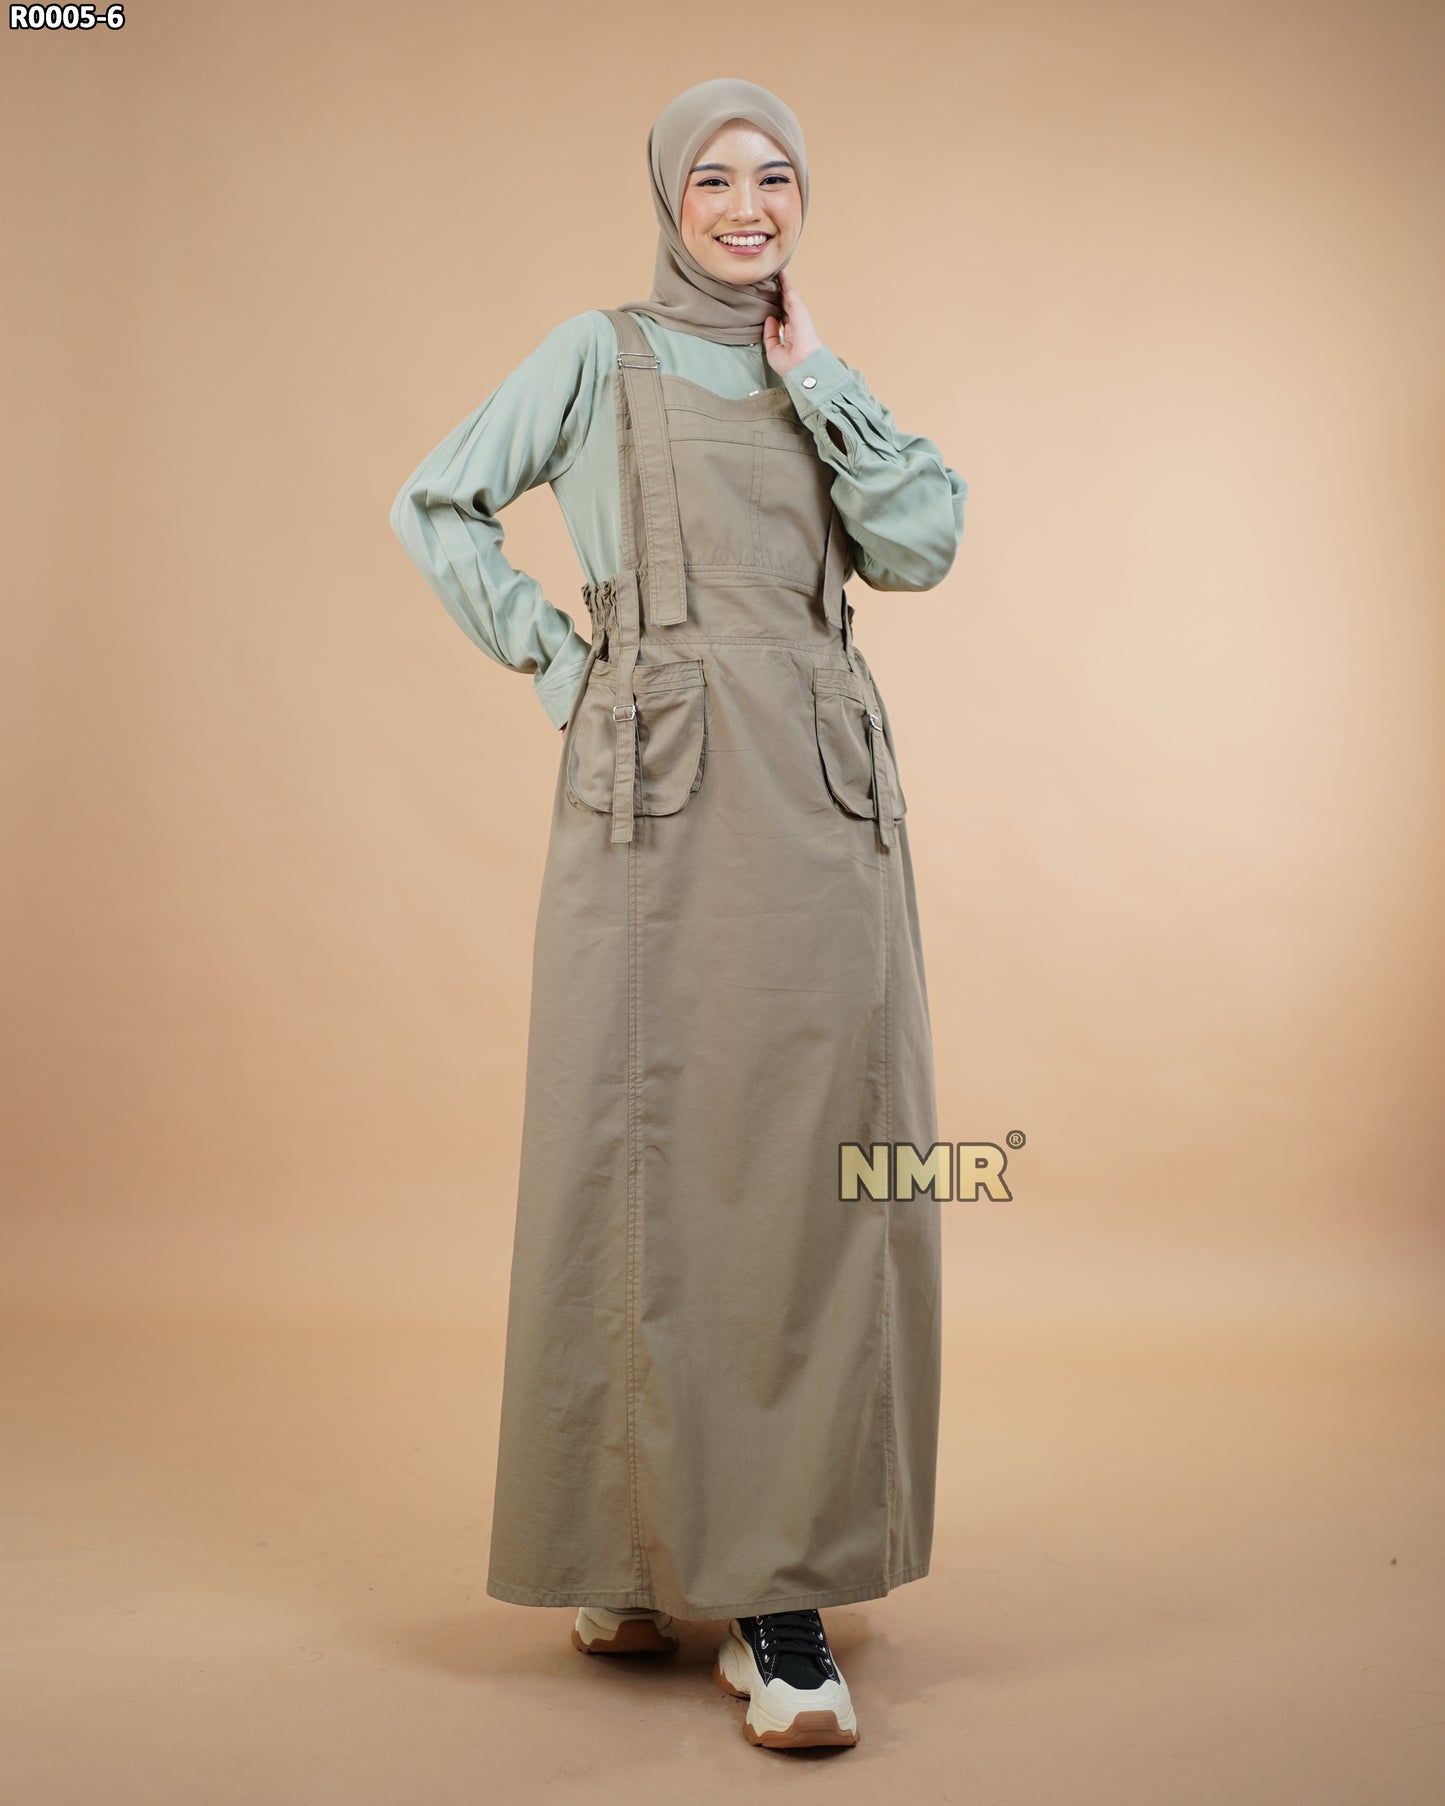 NMR Gamis Jumpsuit Overall Baby Canvas Vol R0005-6